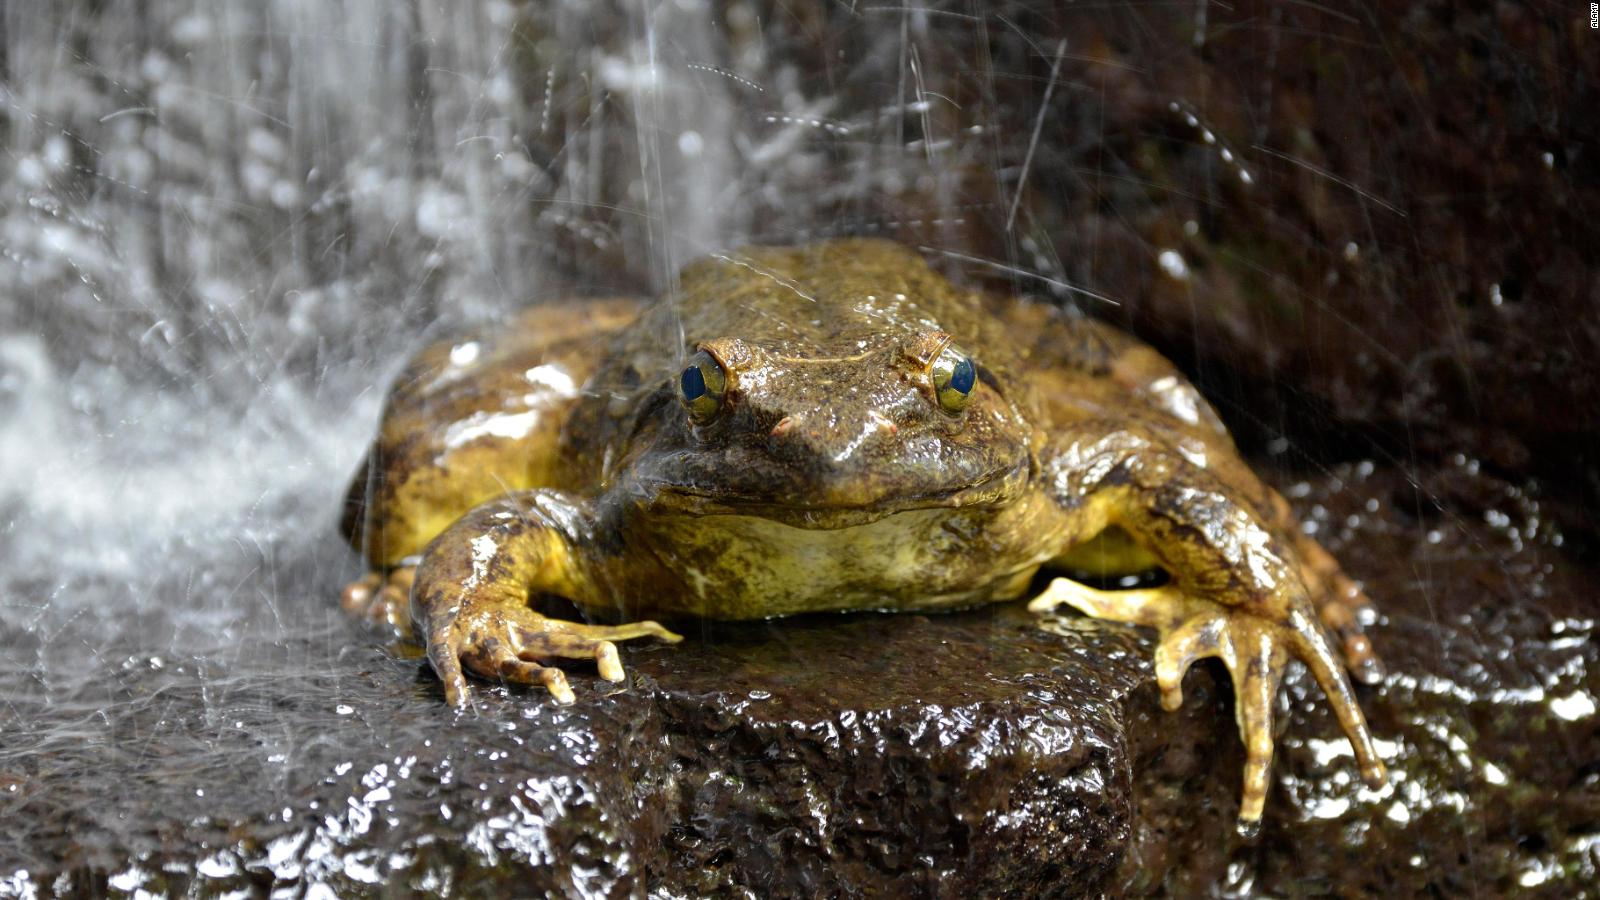 World's biggest frogs are so strong they move heavy rocks to build